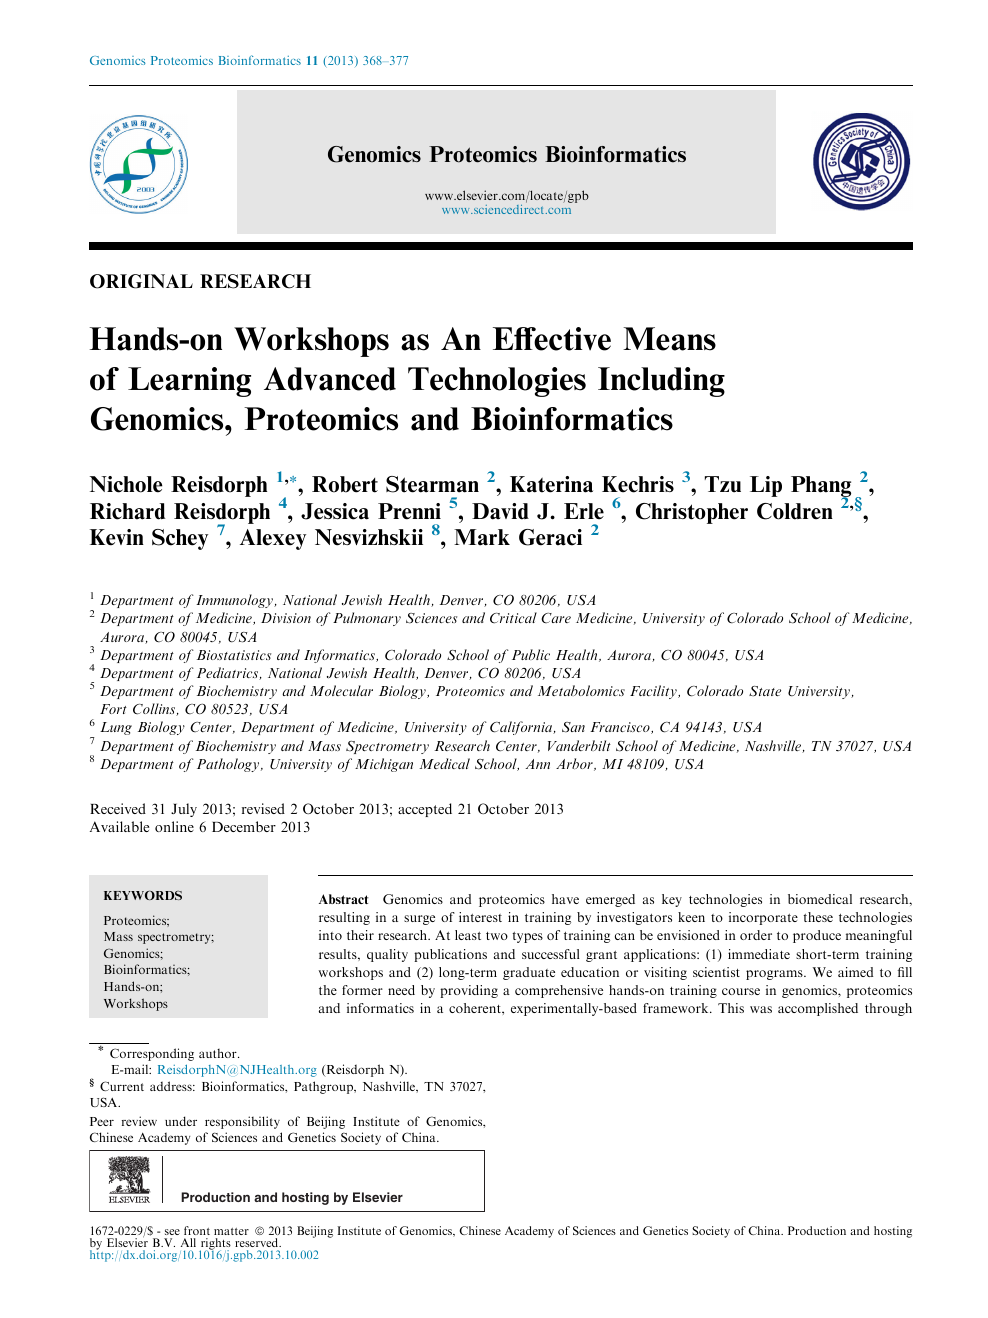 Hands On Workshops As An Effective Means Of Learning Advanced Technologies Including Genomics Proteomics And Bioinformatics Topic Of Research Paper In Clinical Medicine Download Scholarly Article Pdf And Read For Free On